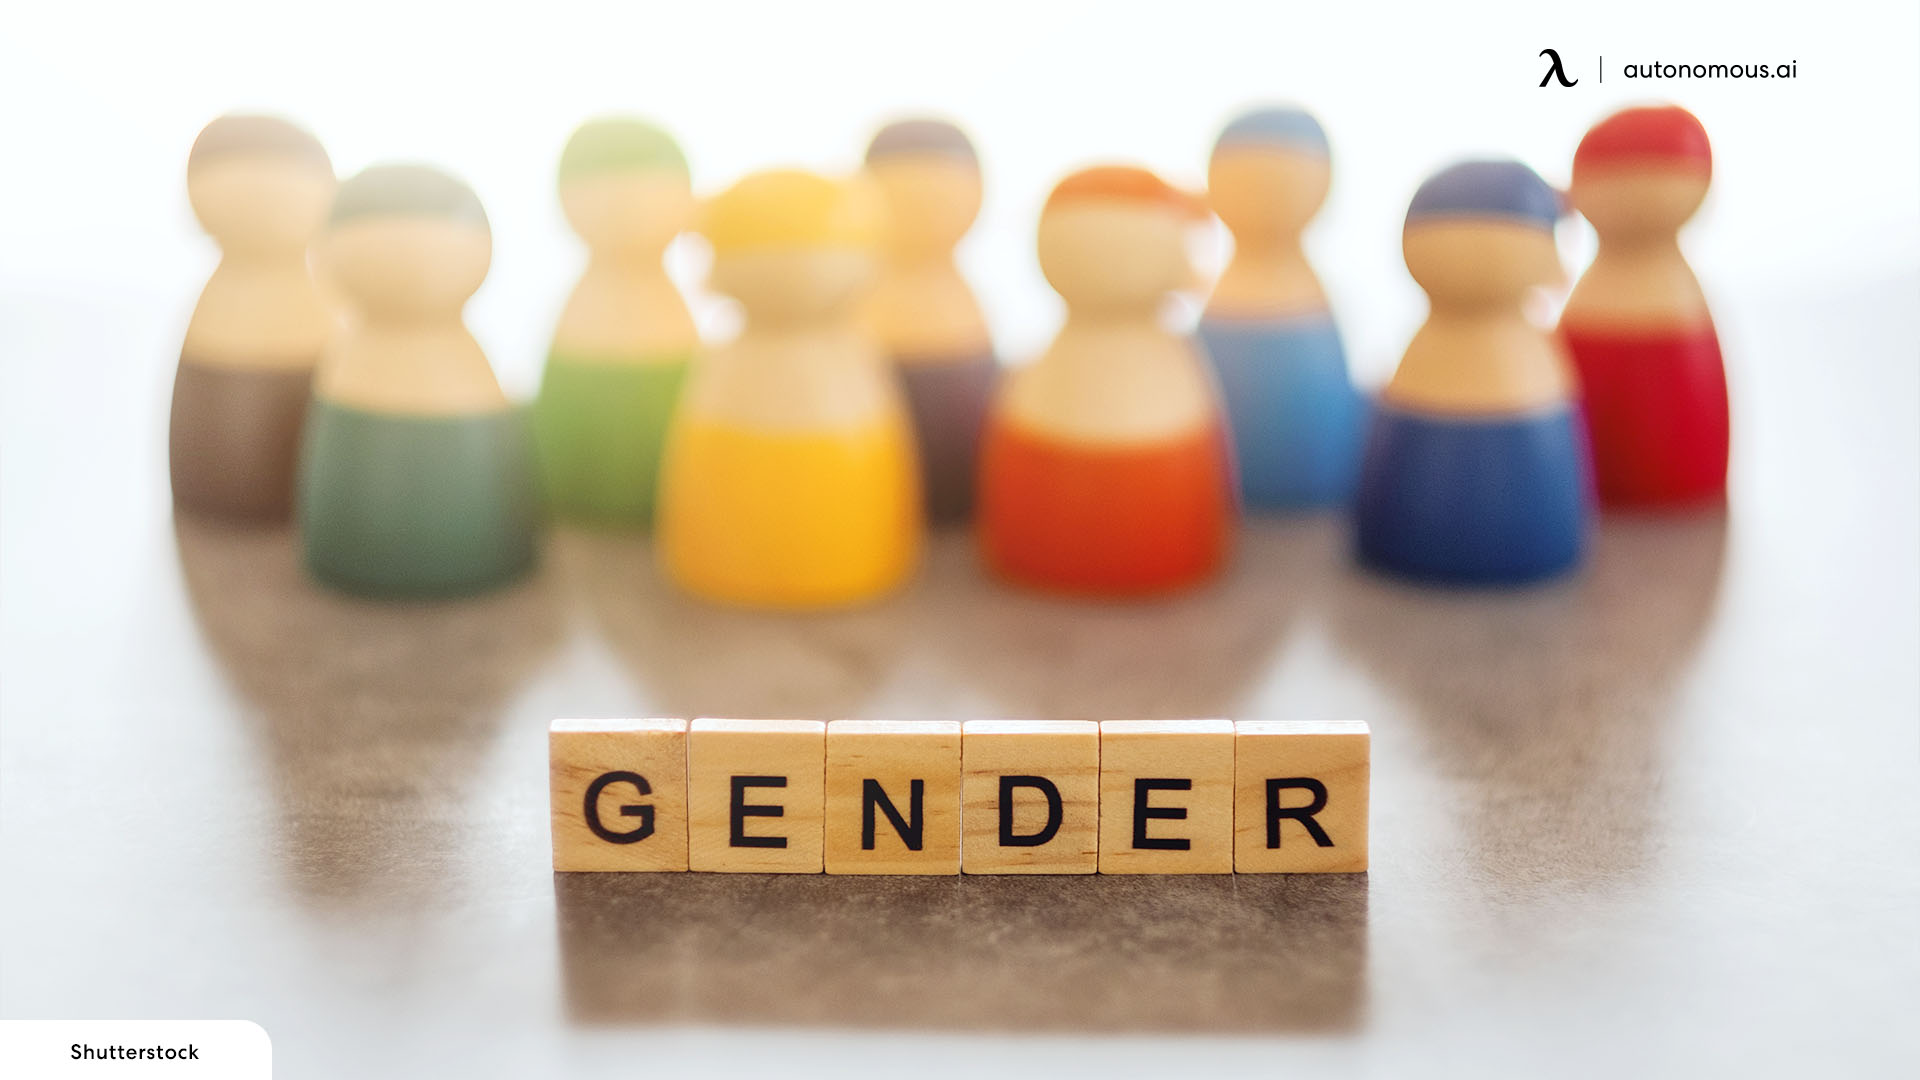 How Do You Promote Gender Equality at Your Workplace?